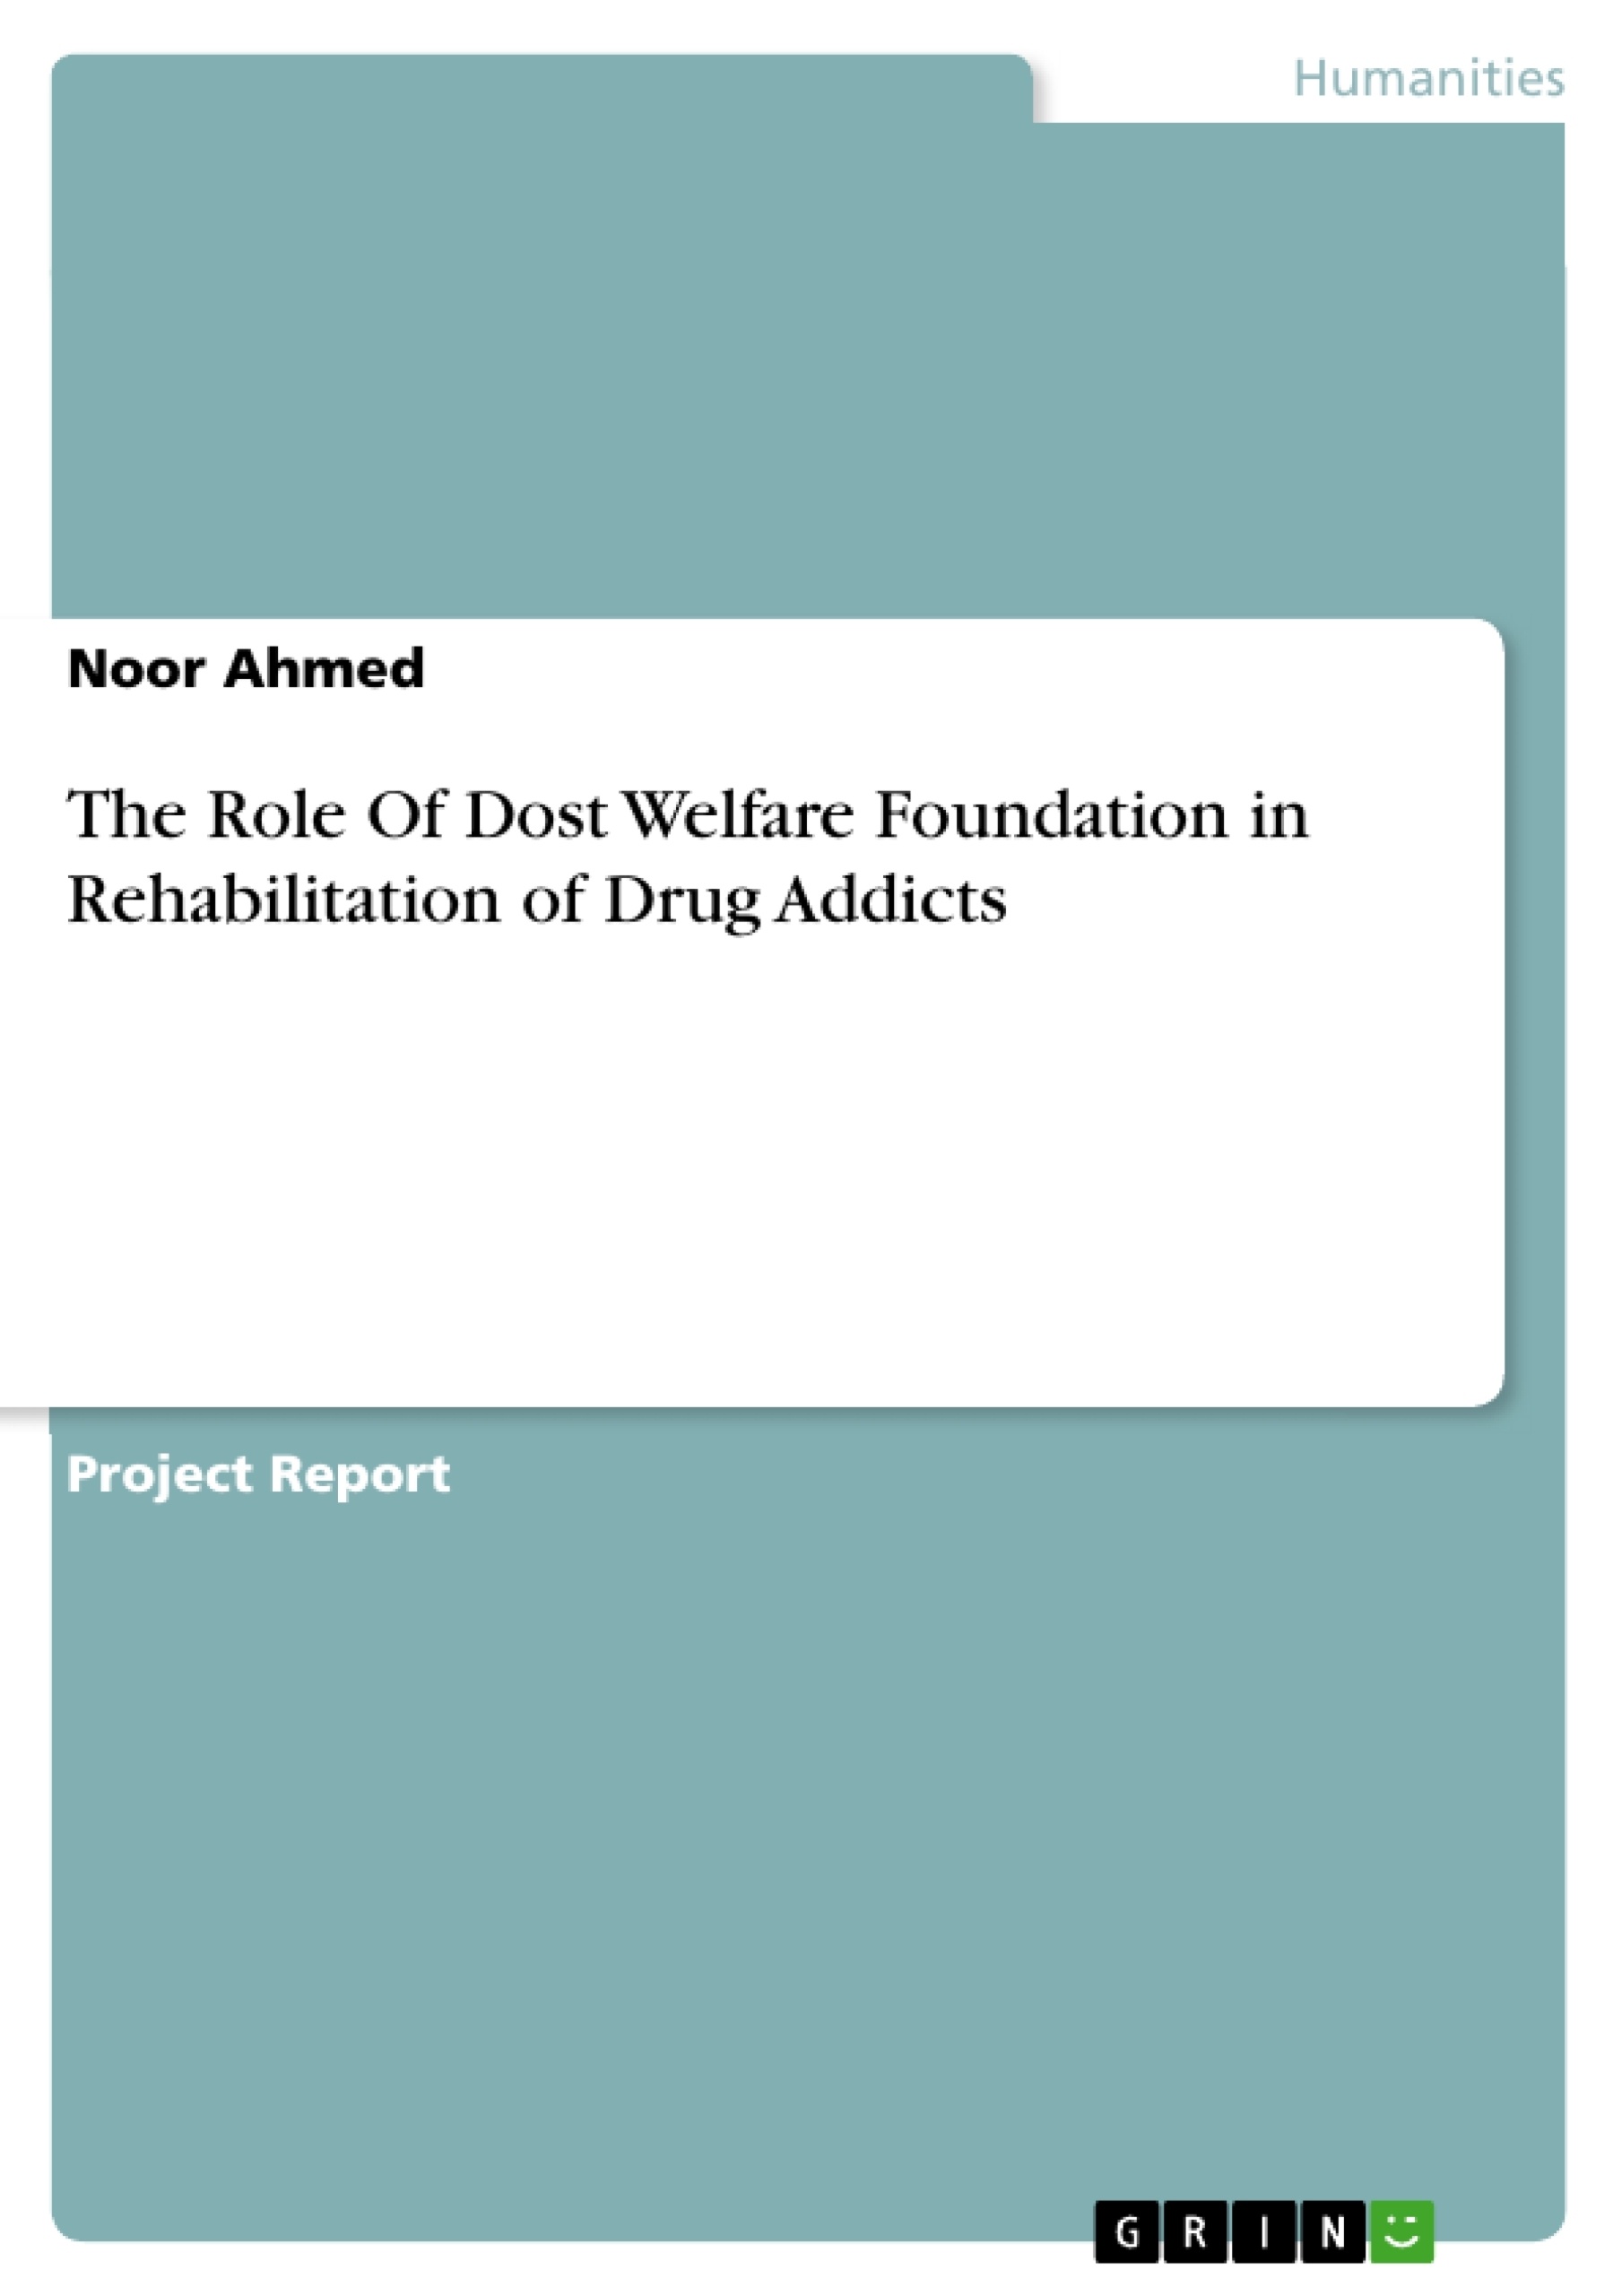 Title: The Role Of Dost Welfare Foundation in Rehabilitation of Drug Addicts